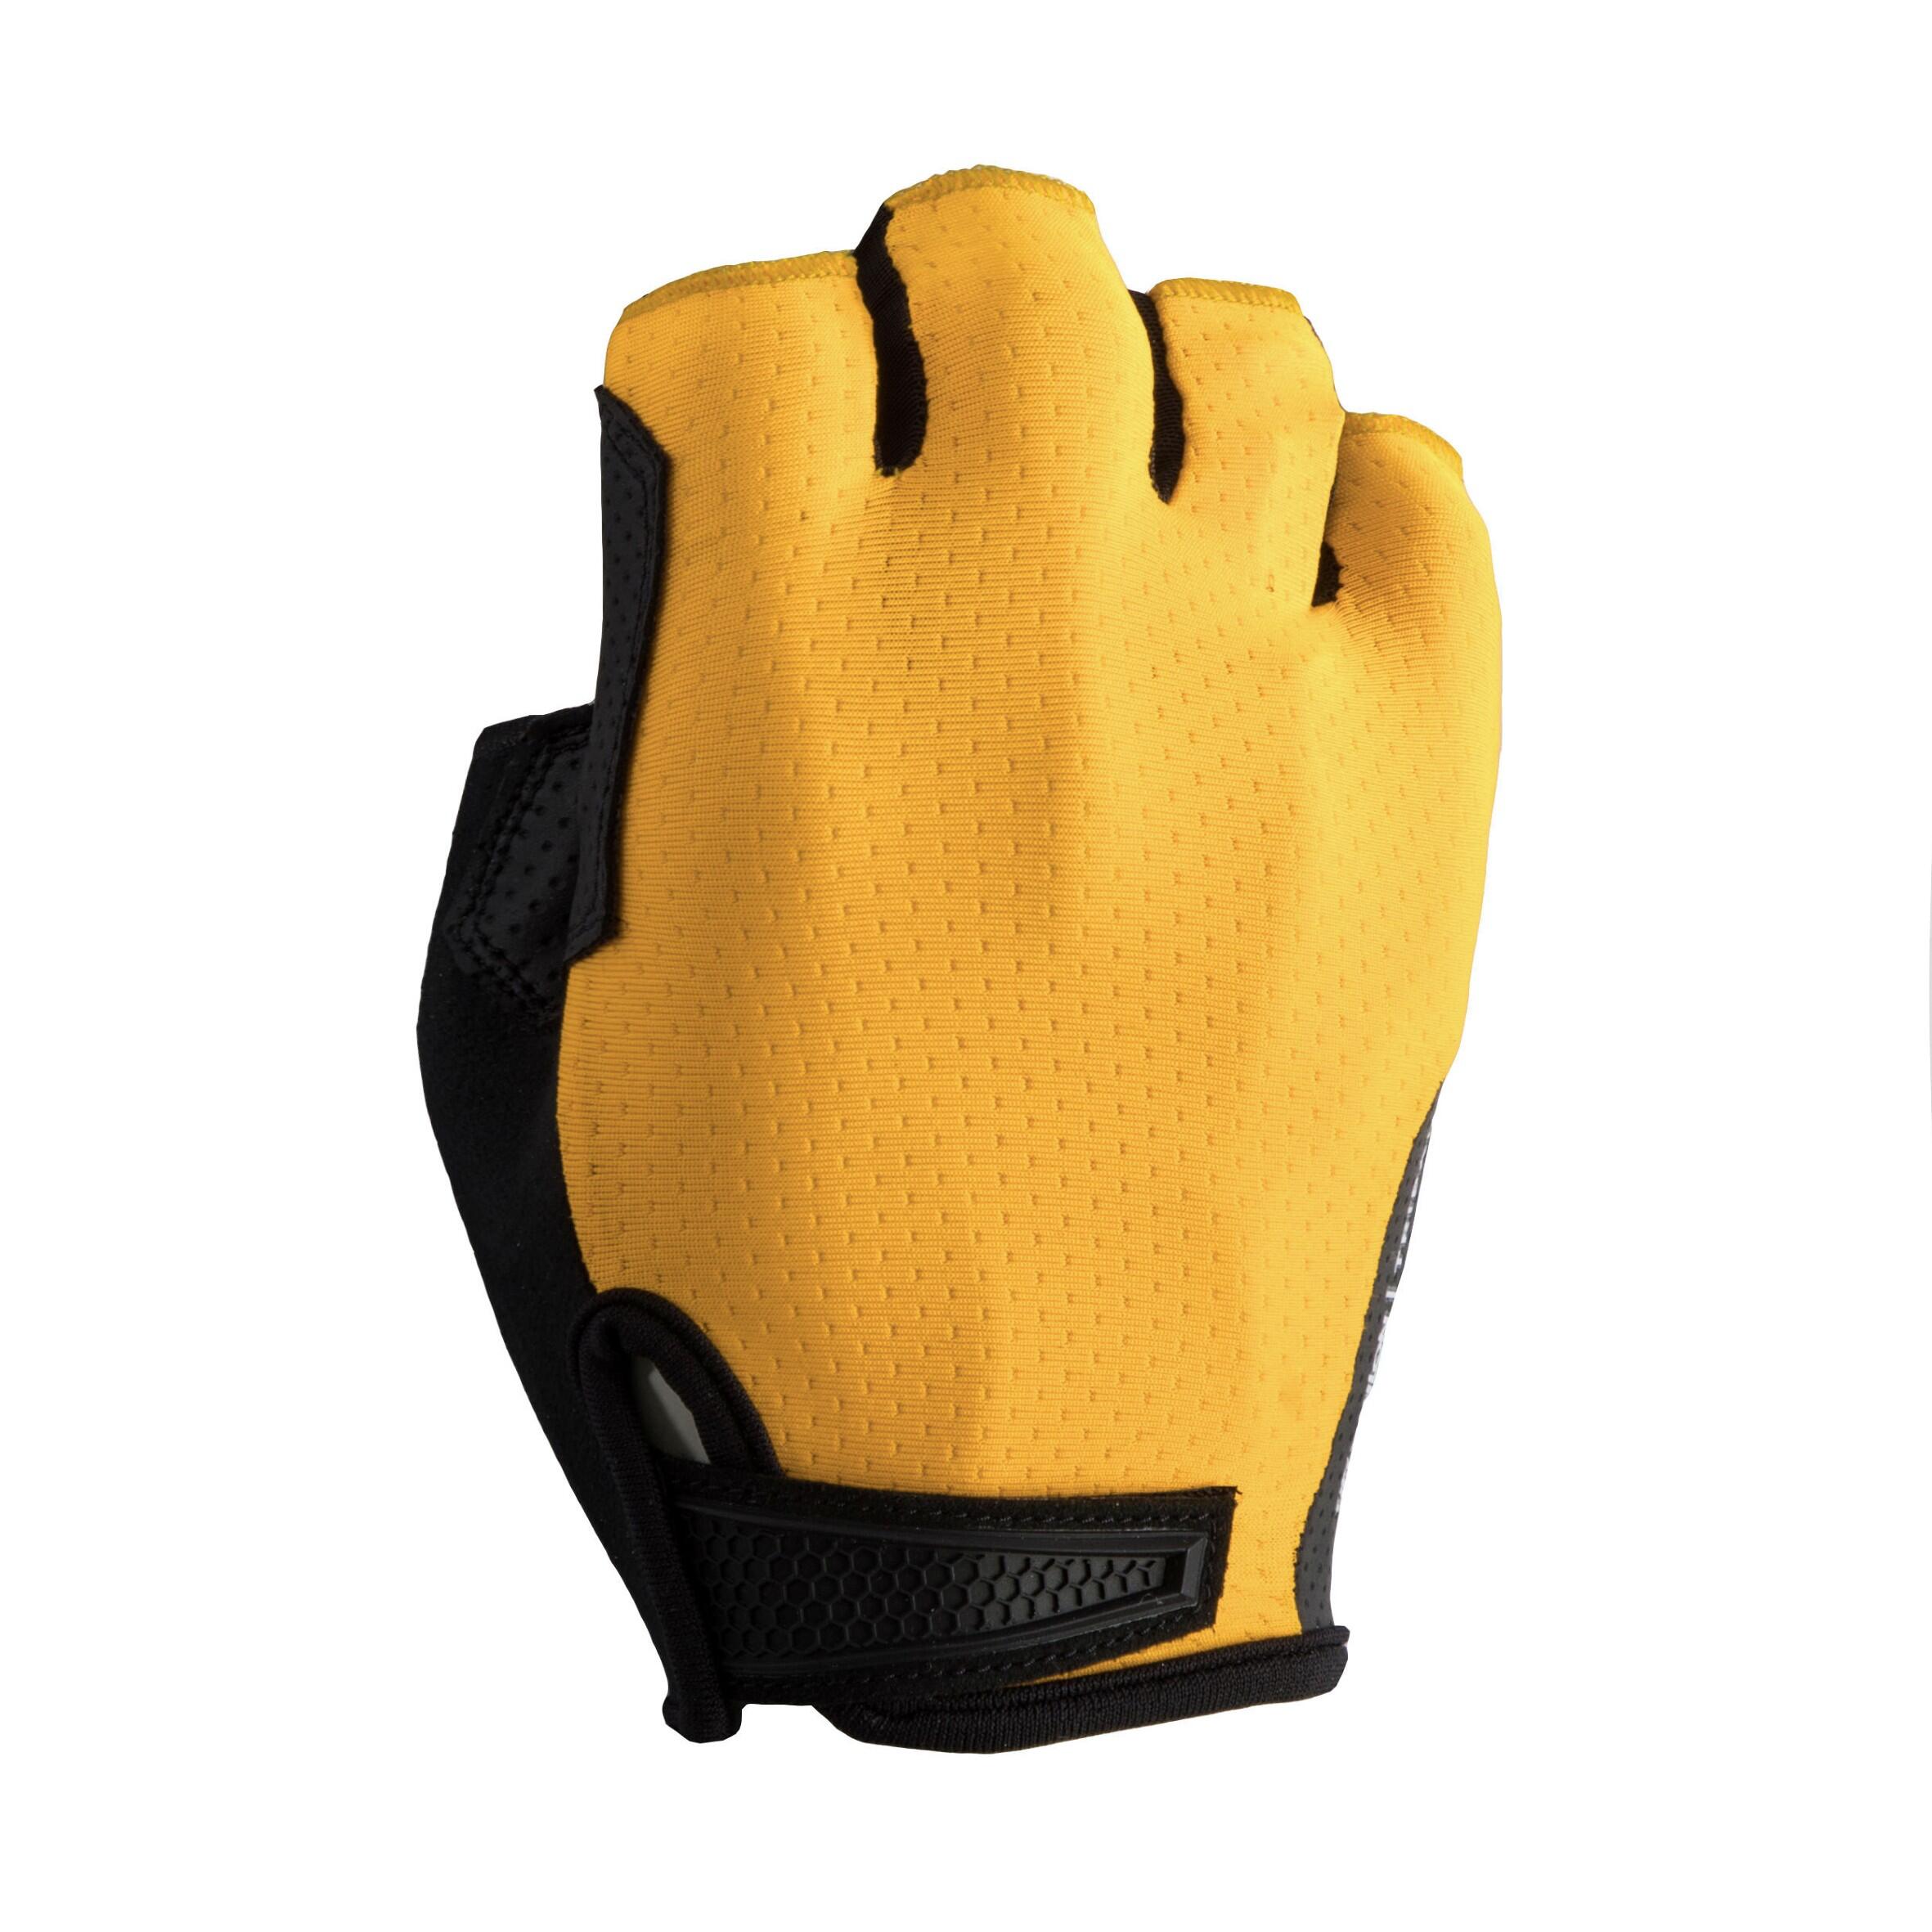 VAN RYSEL Road Cycling Gloves RoadCycling 900 - Ochre